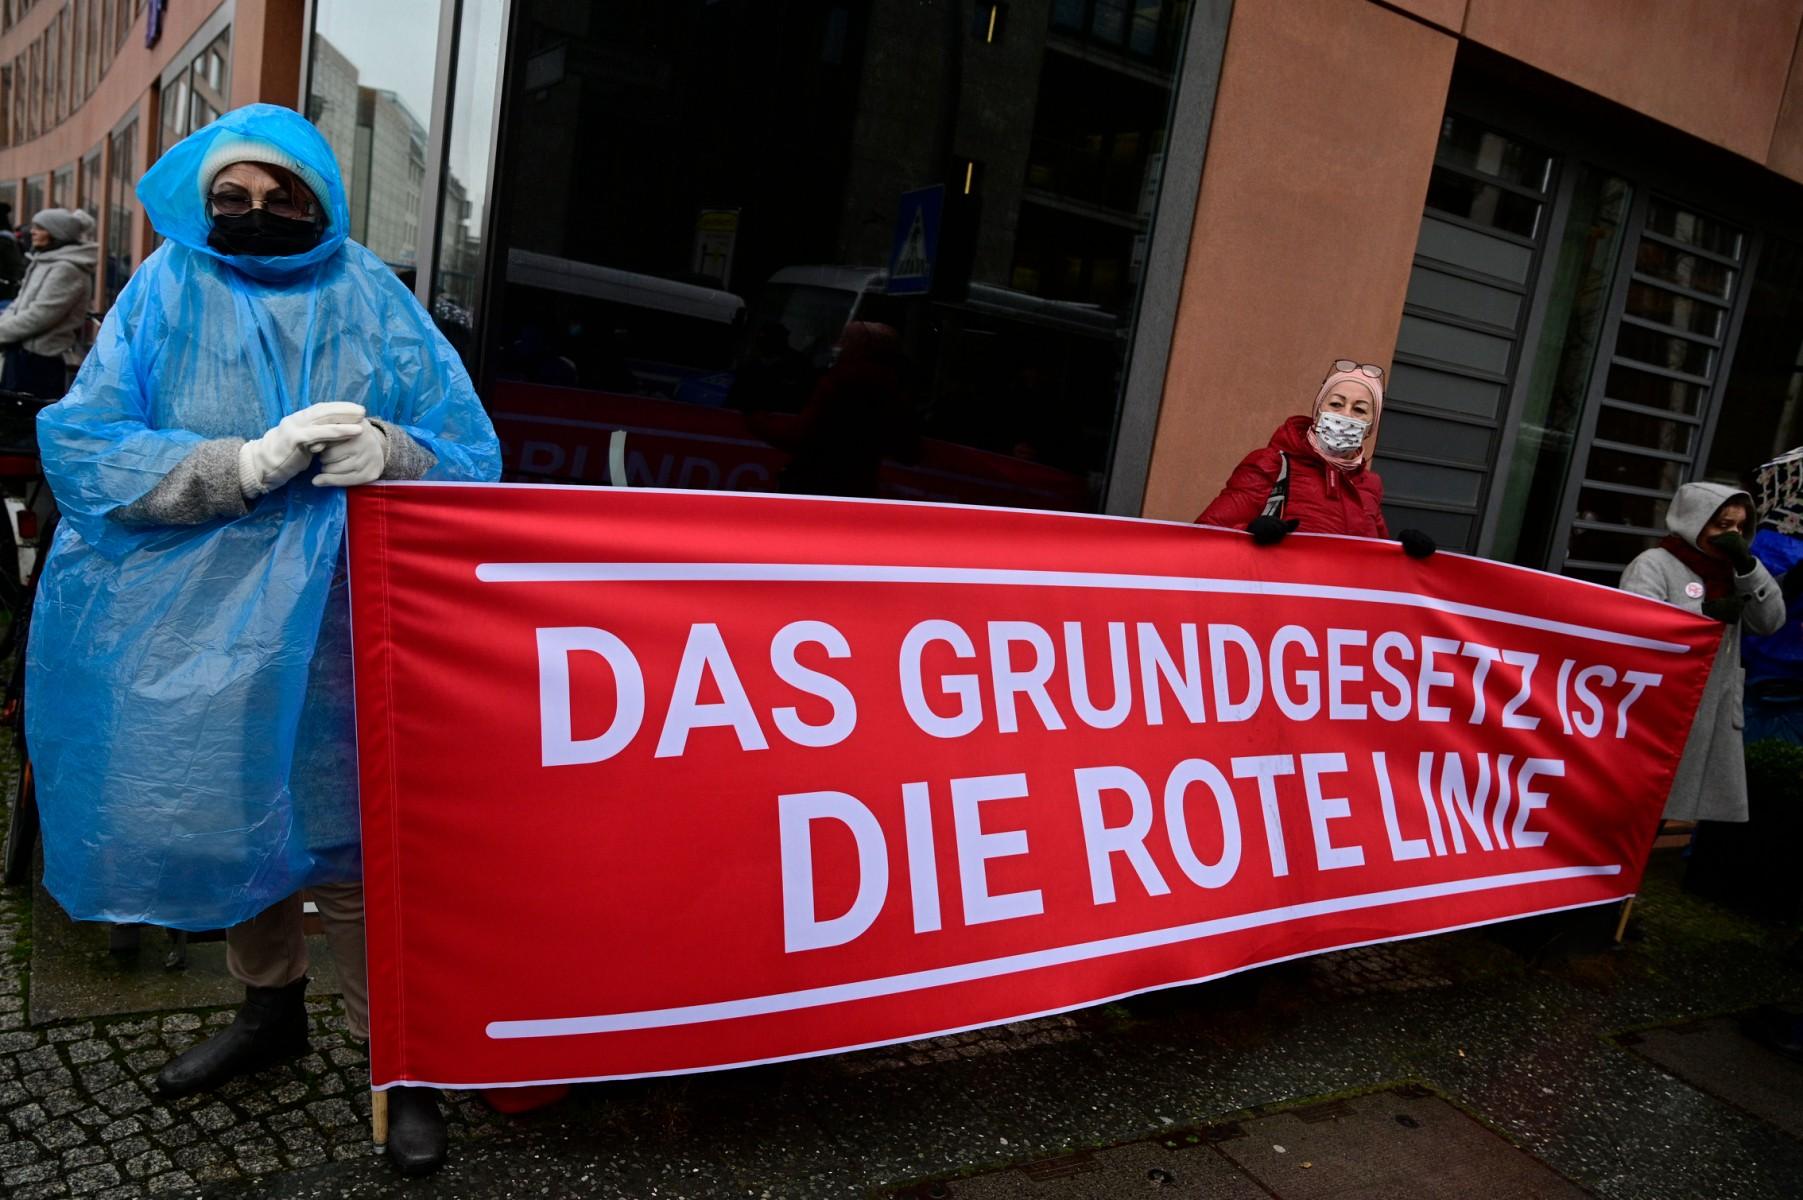 Anti-vaccine protesters hold a banner that reads 'The constitution is the red line' during a demonstration on Jan 26 in Berlin, while lawmakers debate plans to impose compulsory Covid-19 vaccinations. Photo: AFP